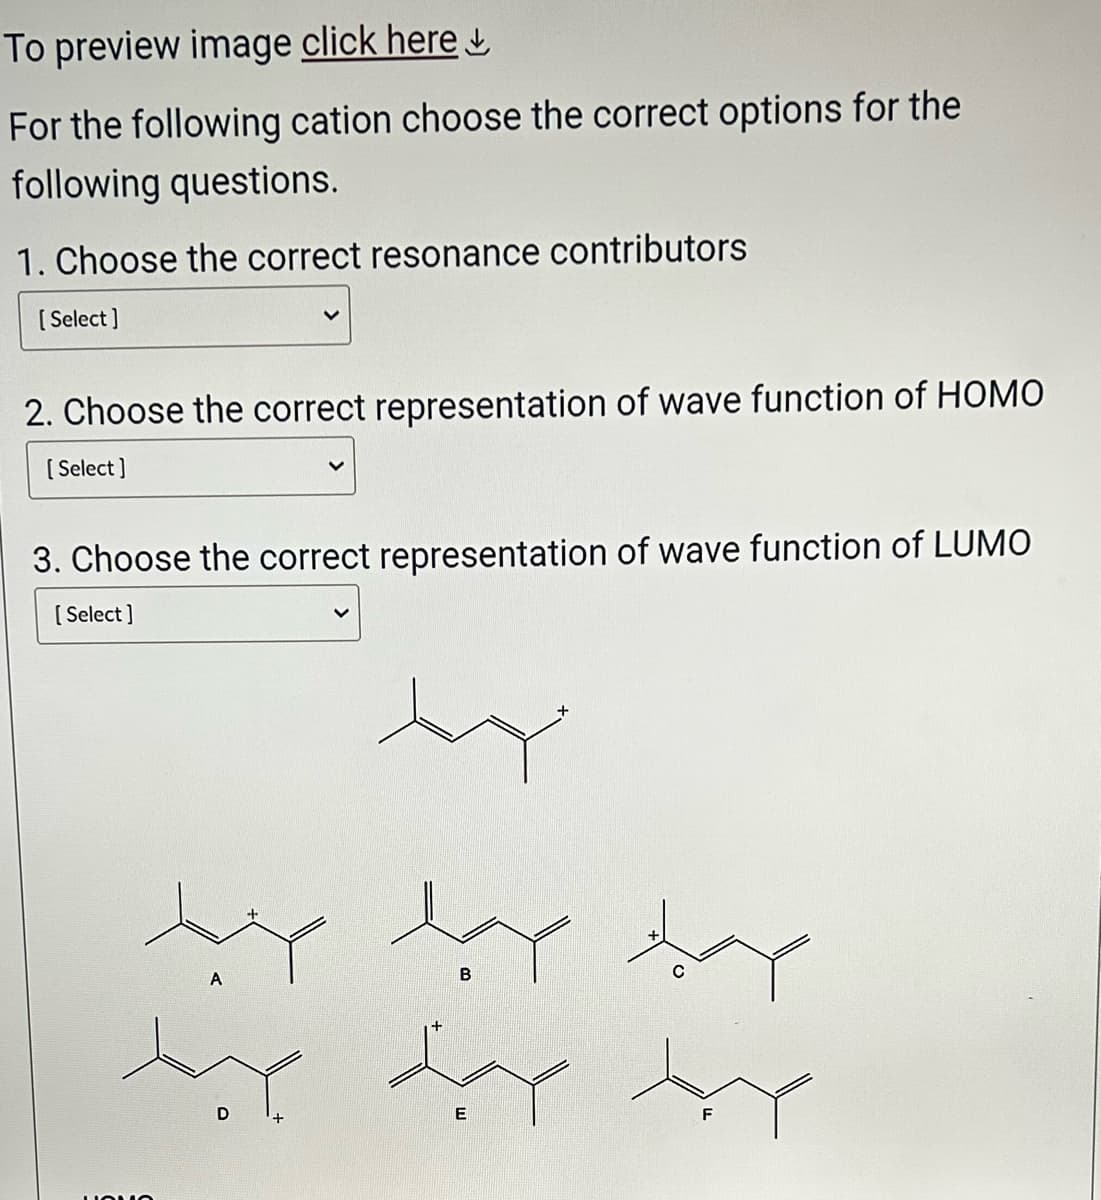 To preview image click here
For the following cation choose the correct options for the
following questions.
1. Choose the correct resonance contributors
[Select]
2. Choose the correct representation of wave function of HOMO
[Select]
3. Choose the correct representation of wave function of LUMO
[Select]
ساد سبد ضبط
QUO
A
the day the
D
E
B
+